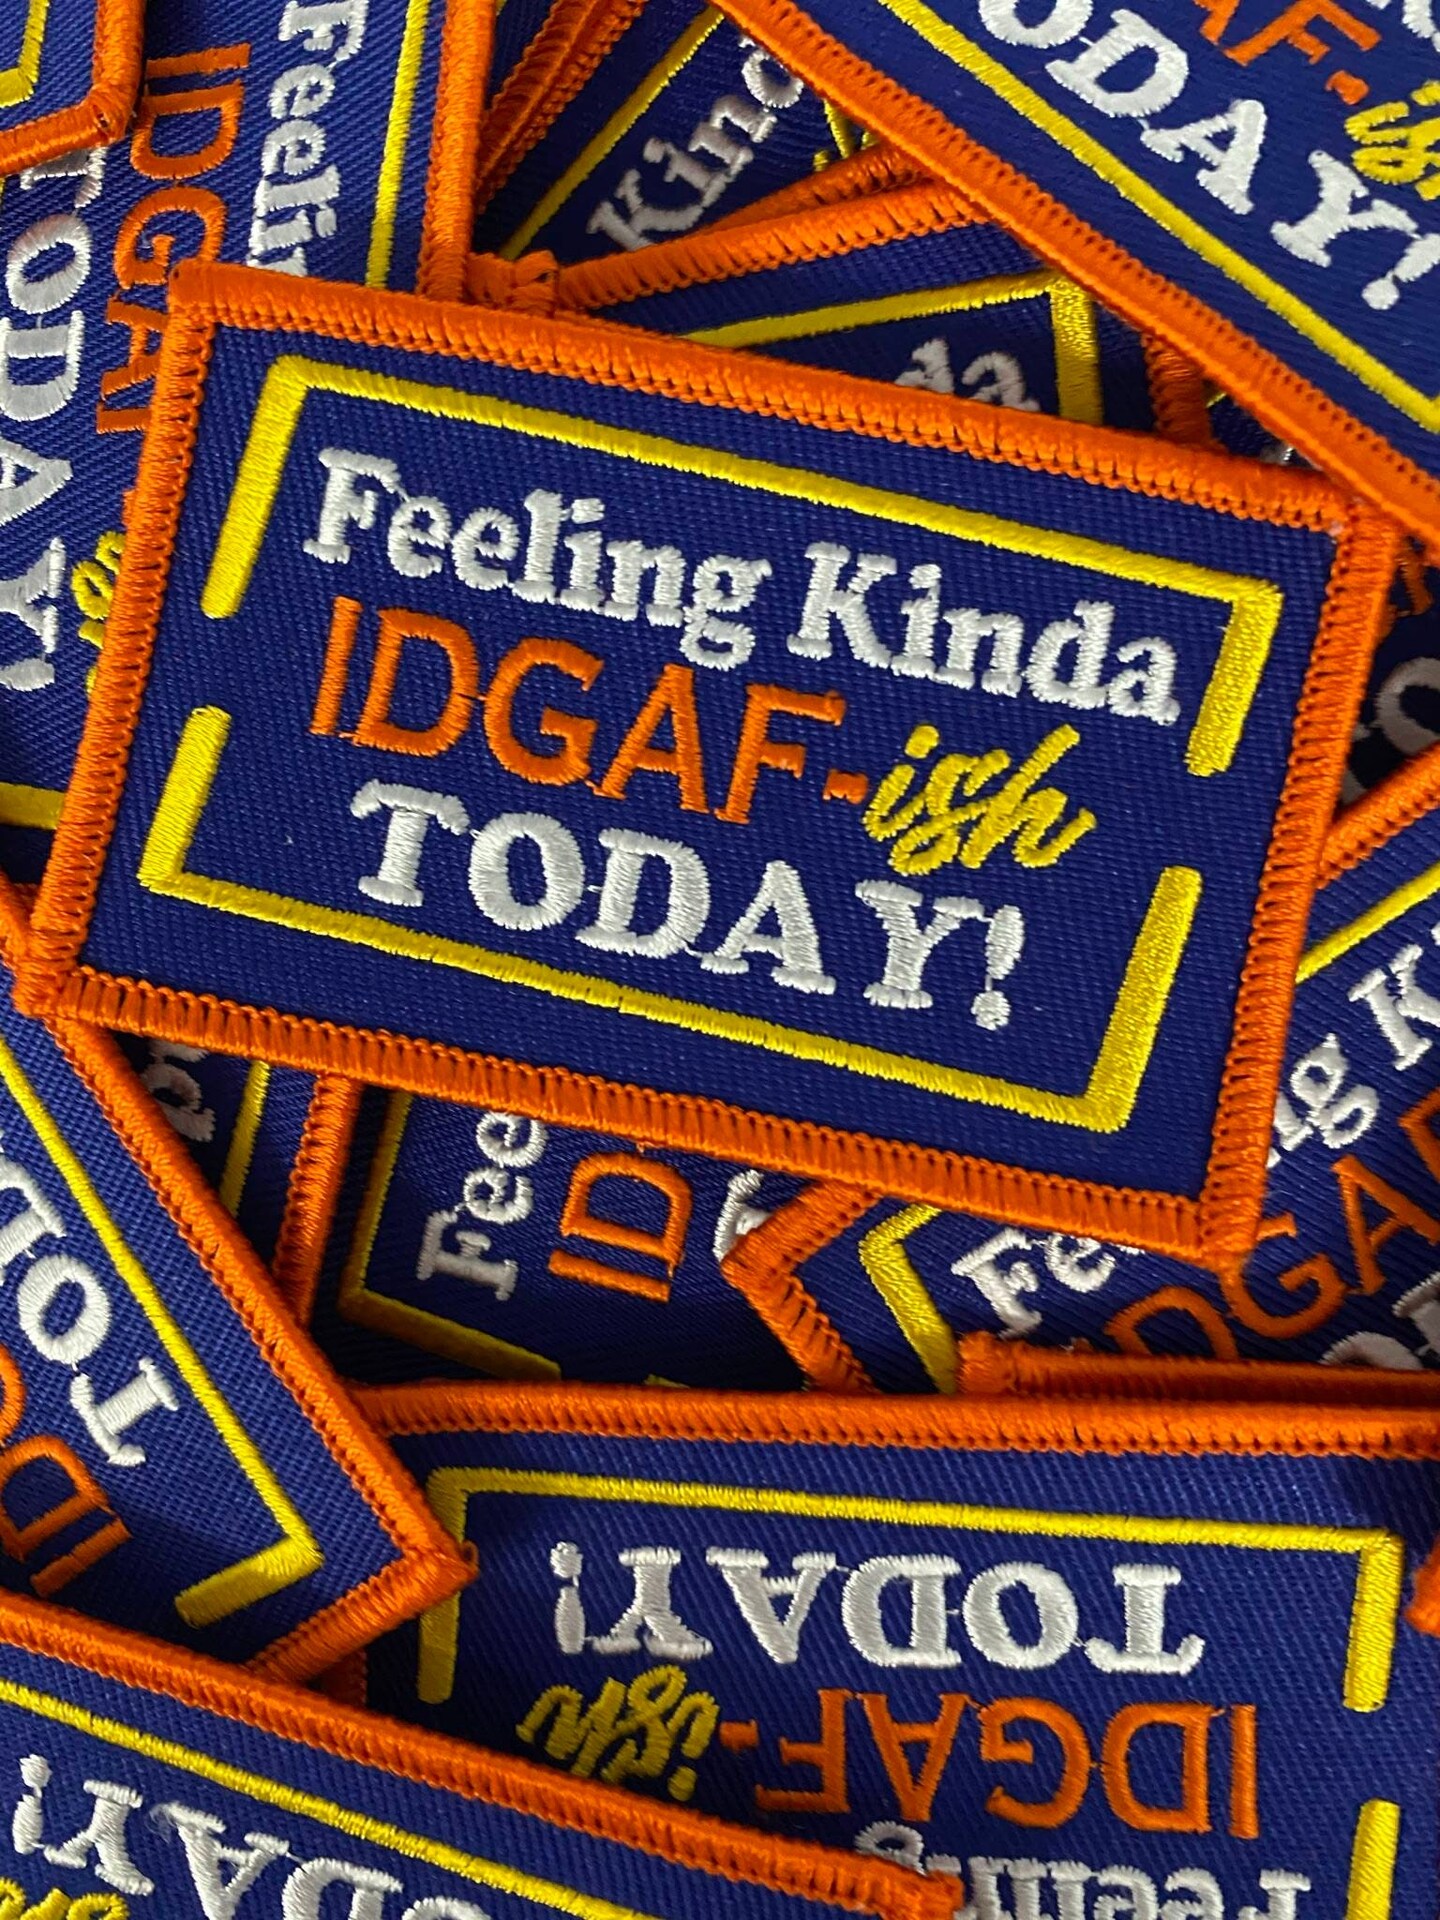 &#x22;Feeling Kinda IDGAF-ish Today&#x22; Funny Statement Badge, Iron-on Embroidered Patch, Size 3&#x22;x2&#x22; inches